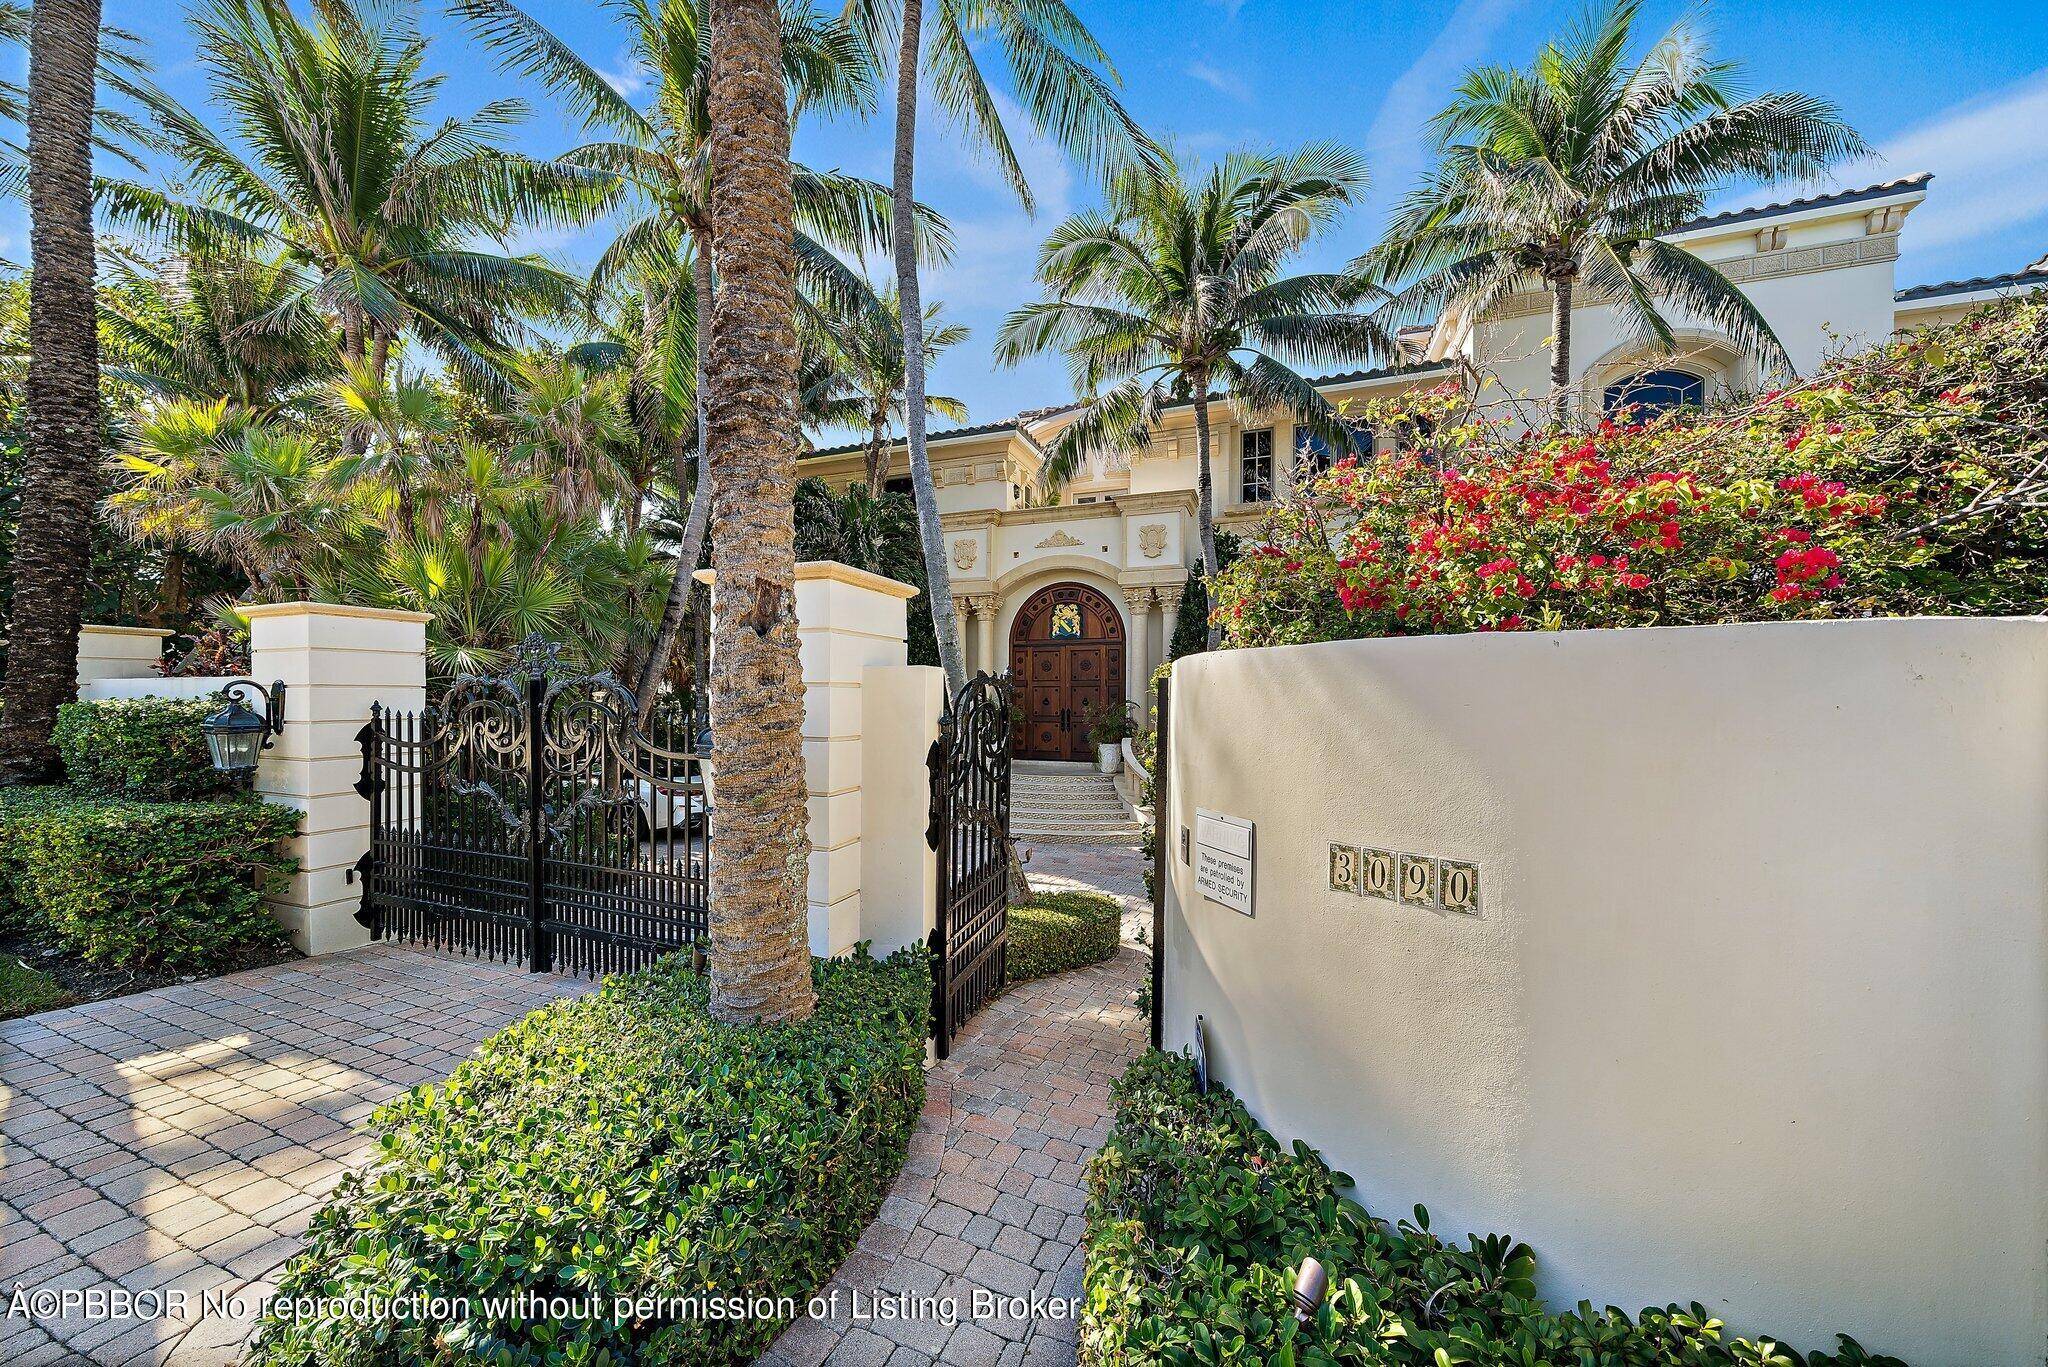 This spectacular custom estate is a fully furnished, luxurious oasis perched between the Intracoastal Waterway and the magnificent Atlantic Ocean, offering breathtaking vistas of both.